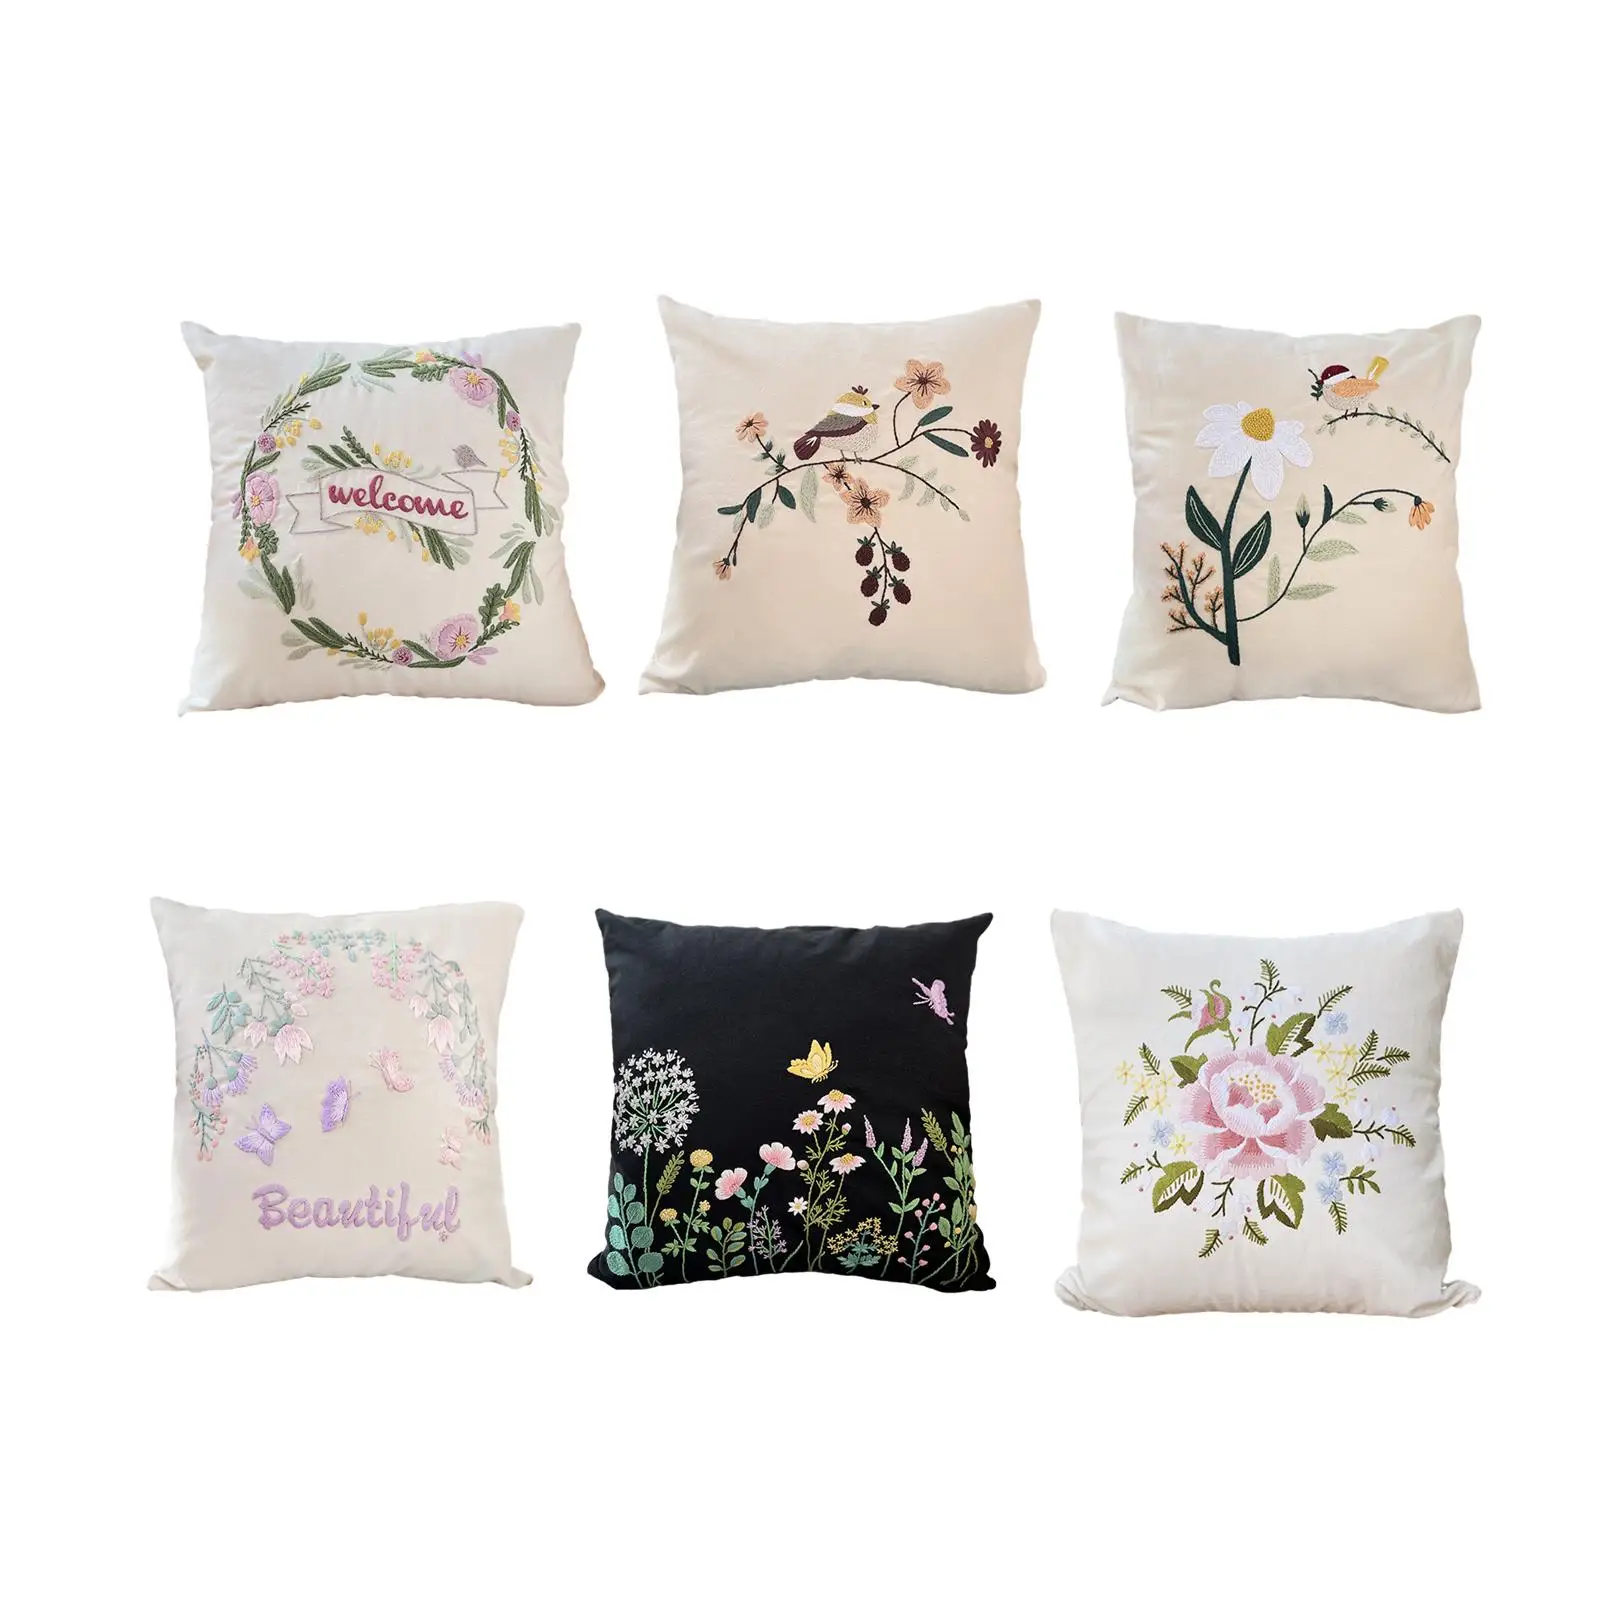 Embroidery Pillow Covers Kits DIY Sofa Sewing Craft with Pattern Living Room Decoration Semi-finished Gift for Adults Beginners